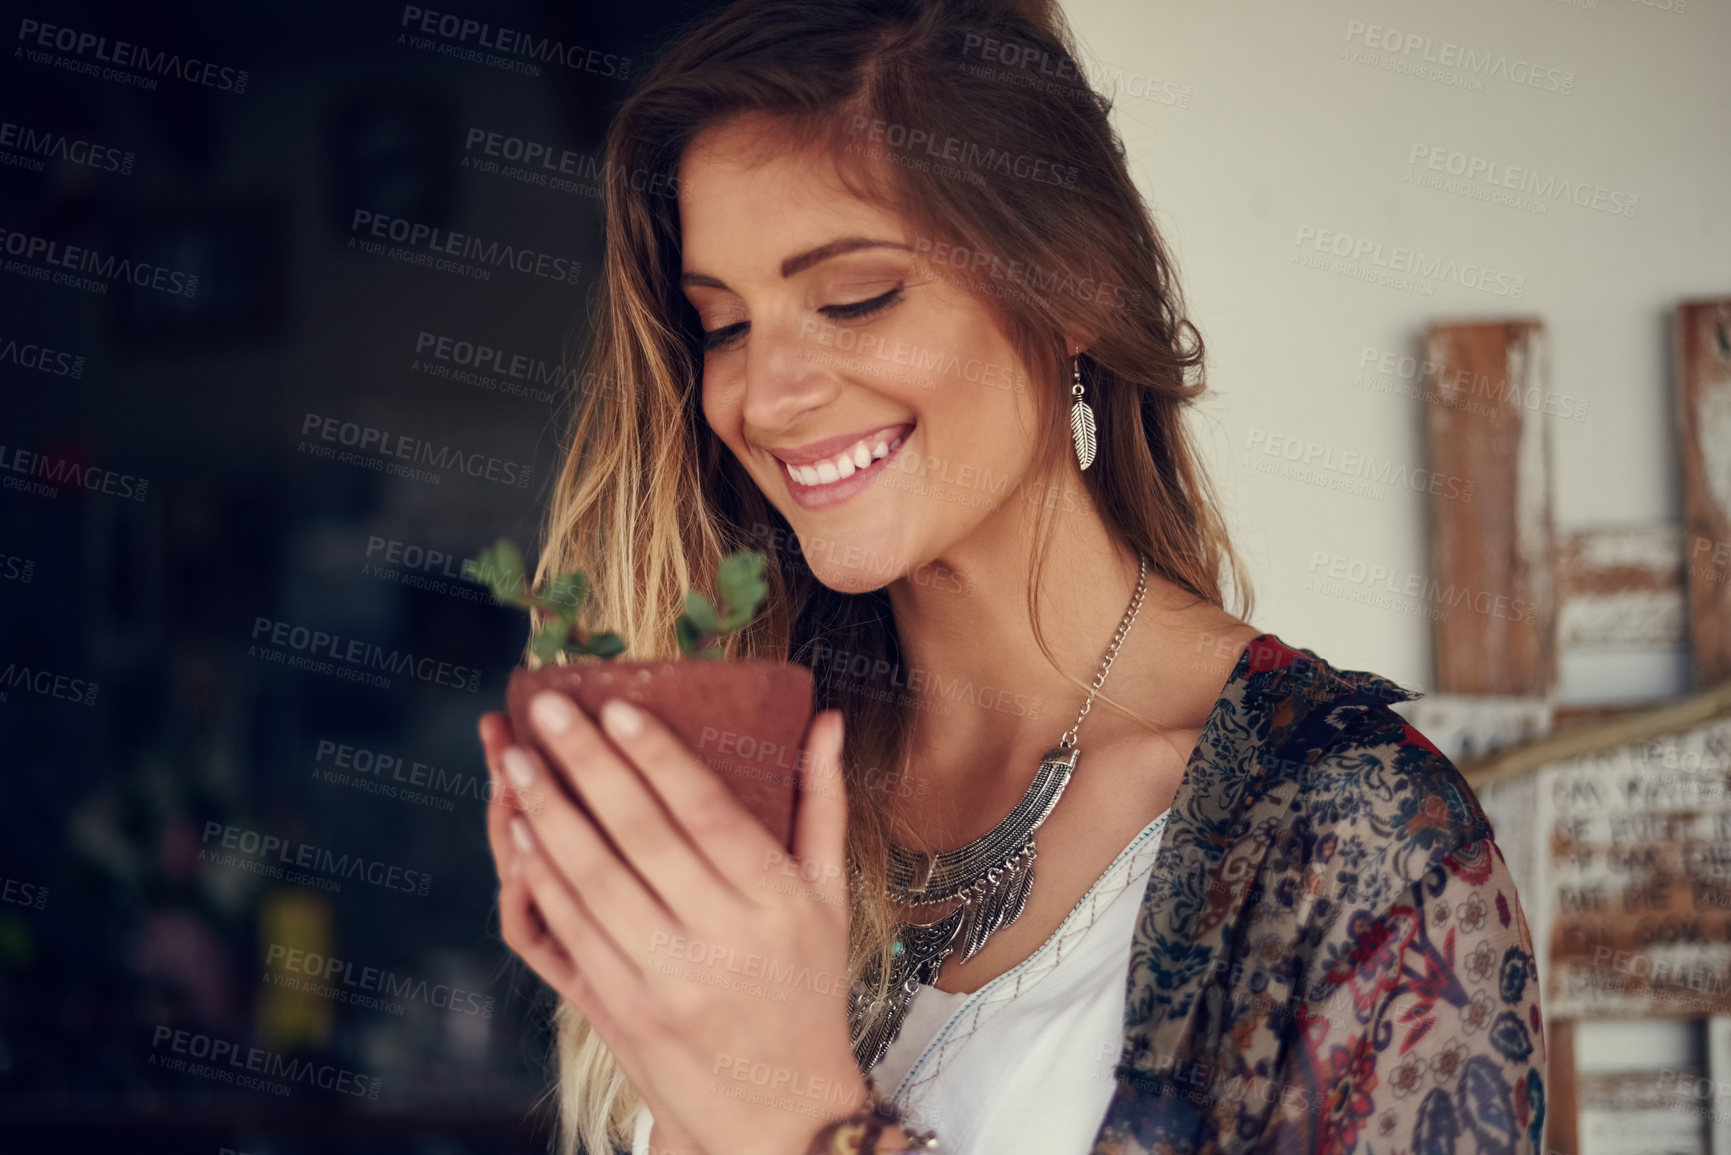 Buy stock photo Shot of a free spirited young woman admiring a pot plant in her hands